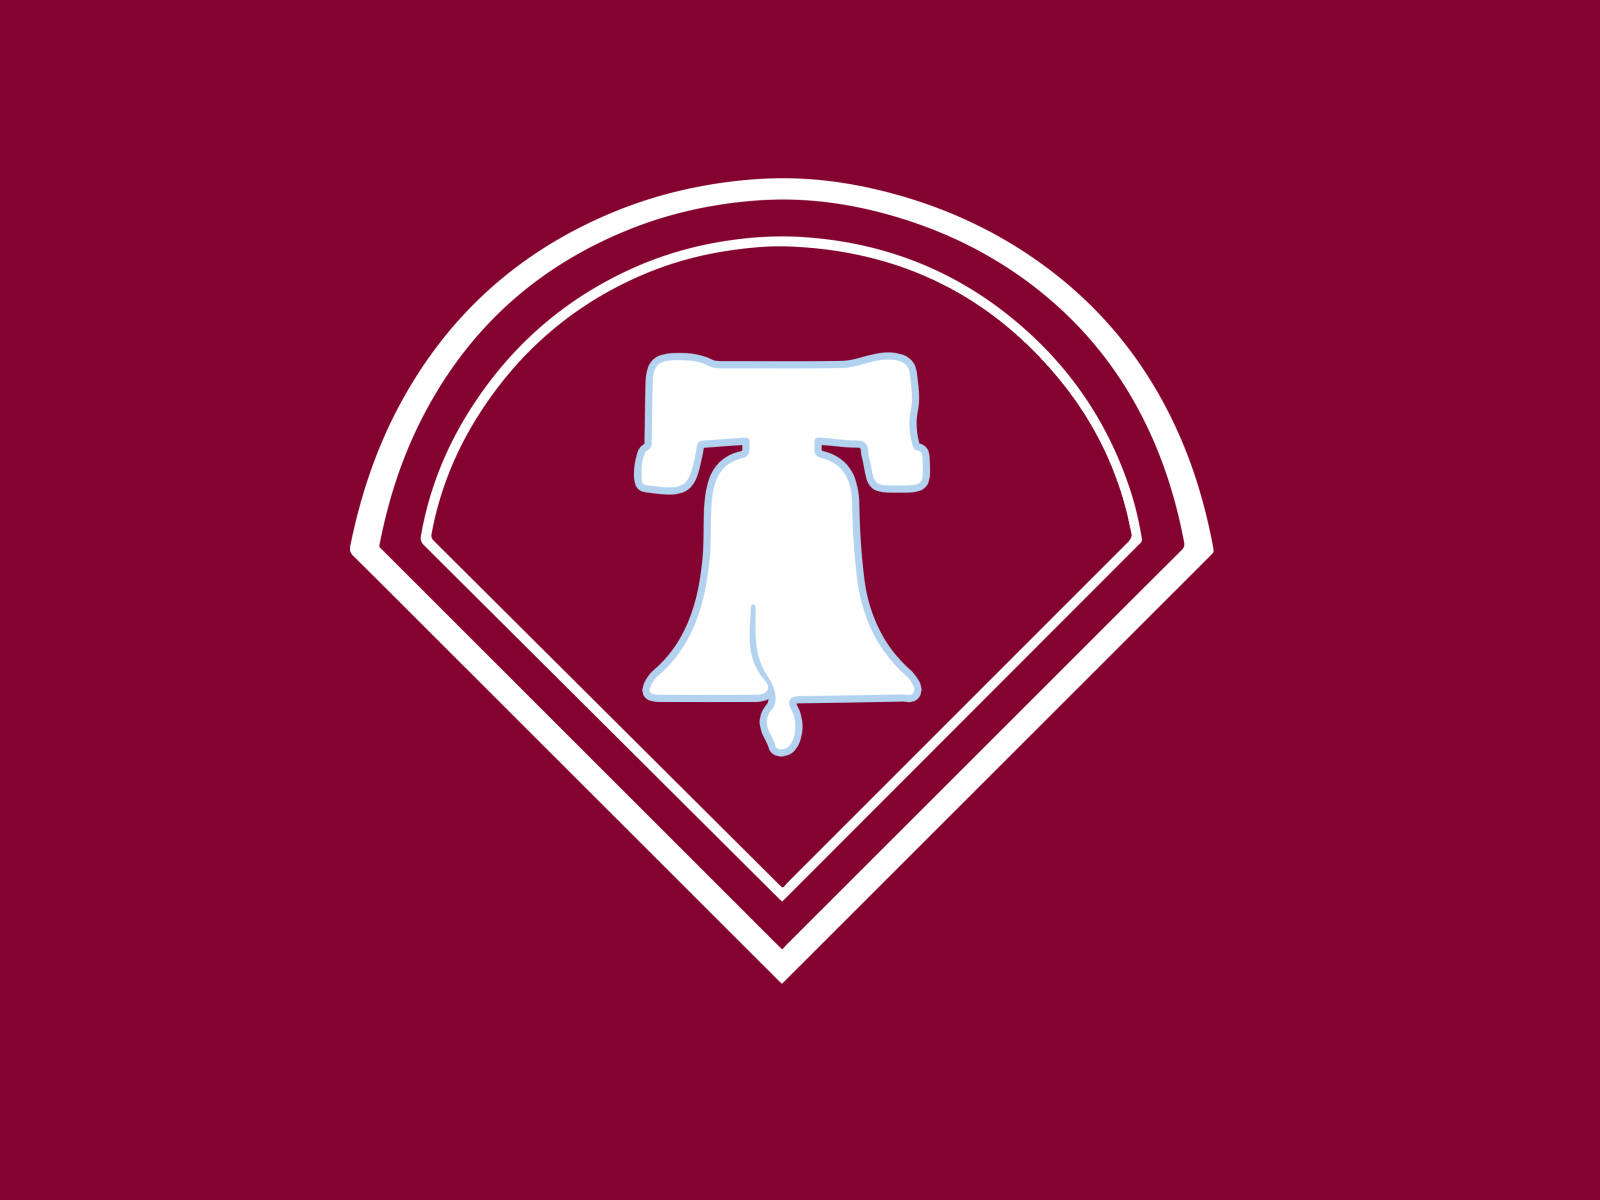 Ring The Bell - Phillies Minimalist Logo by Chris Rosenberry on Dribbble